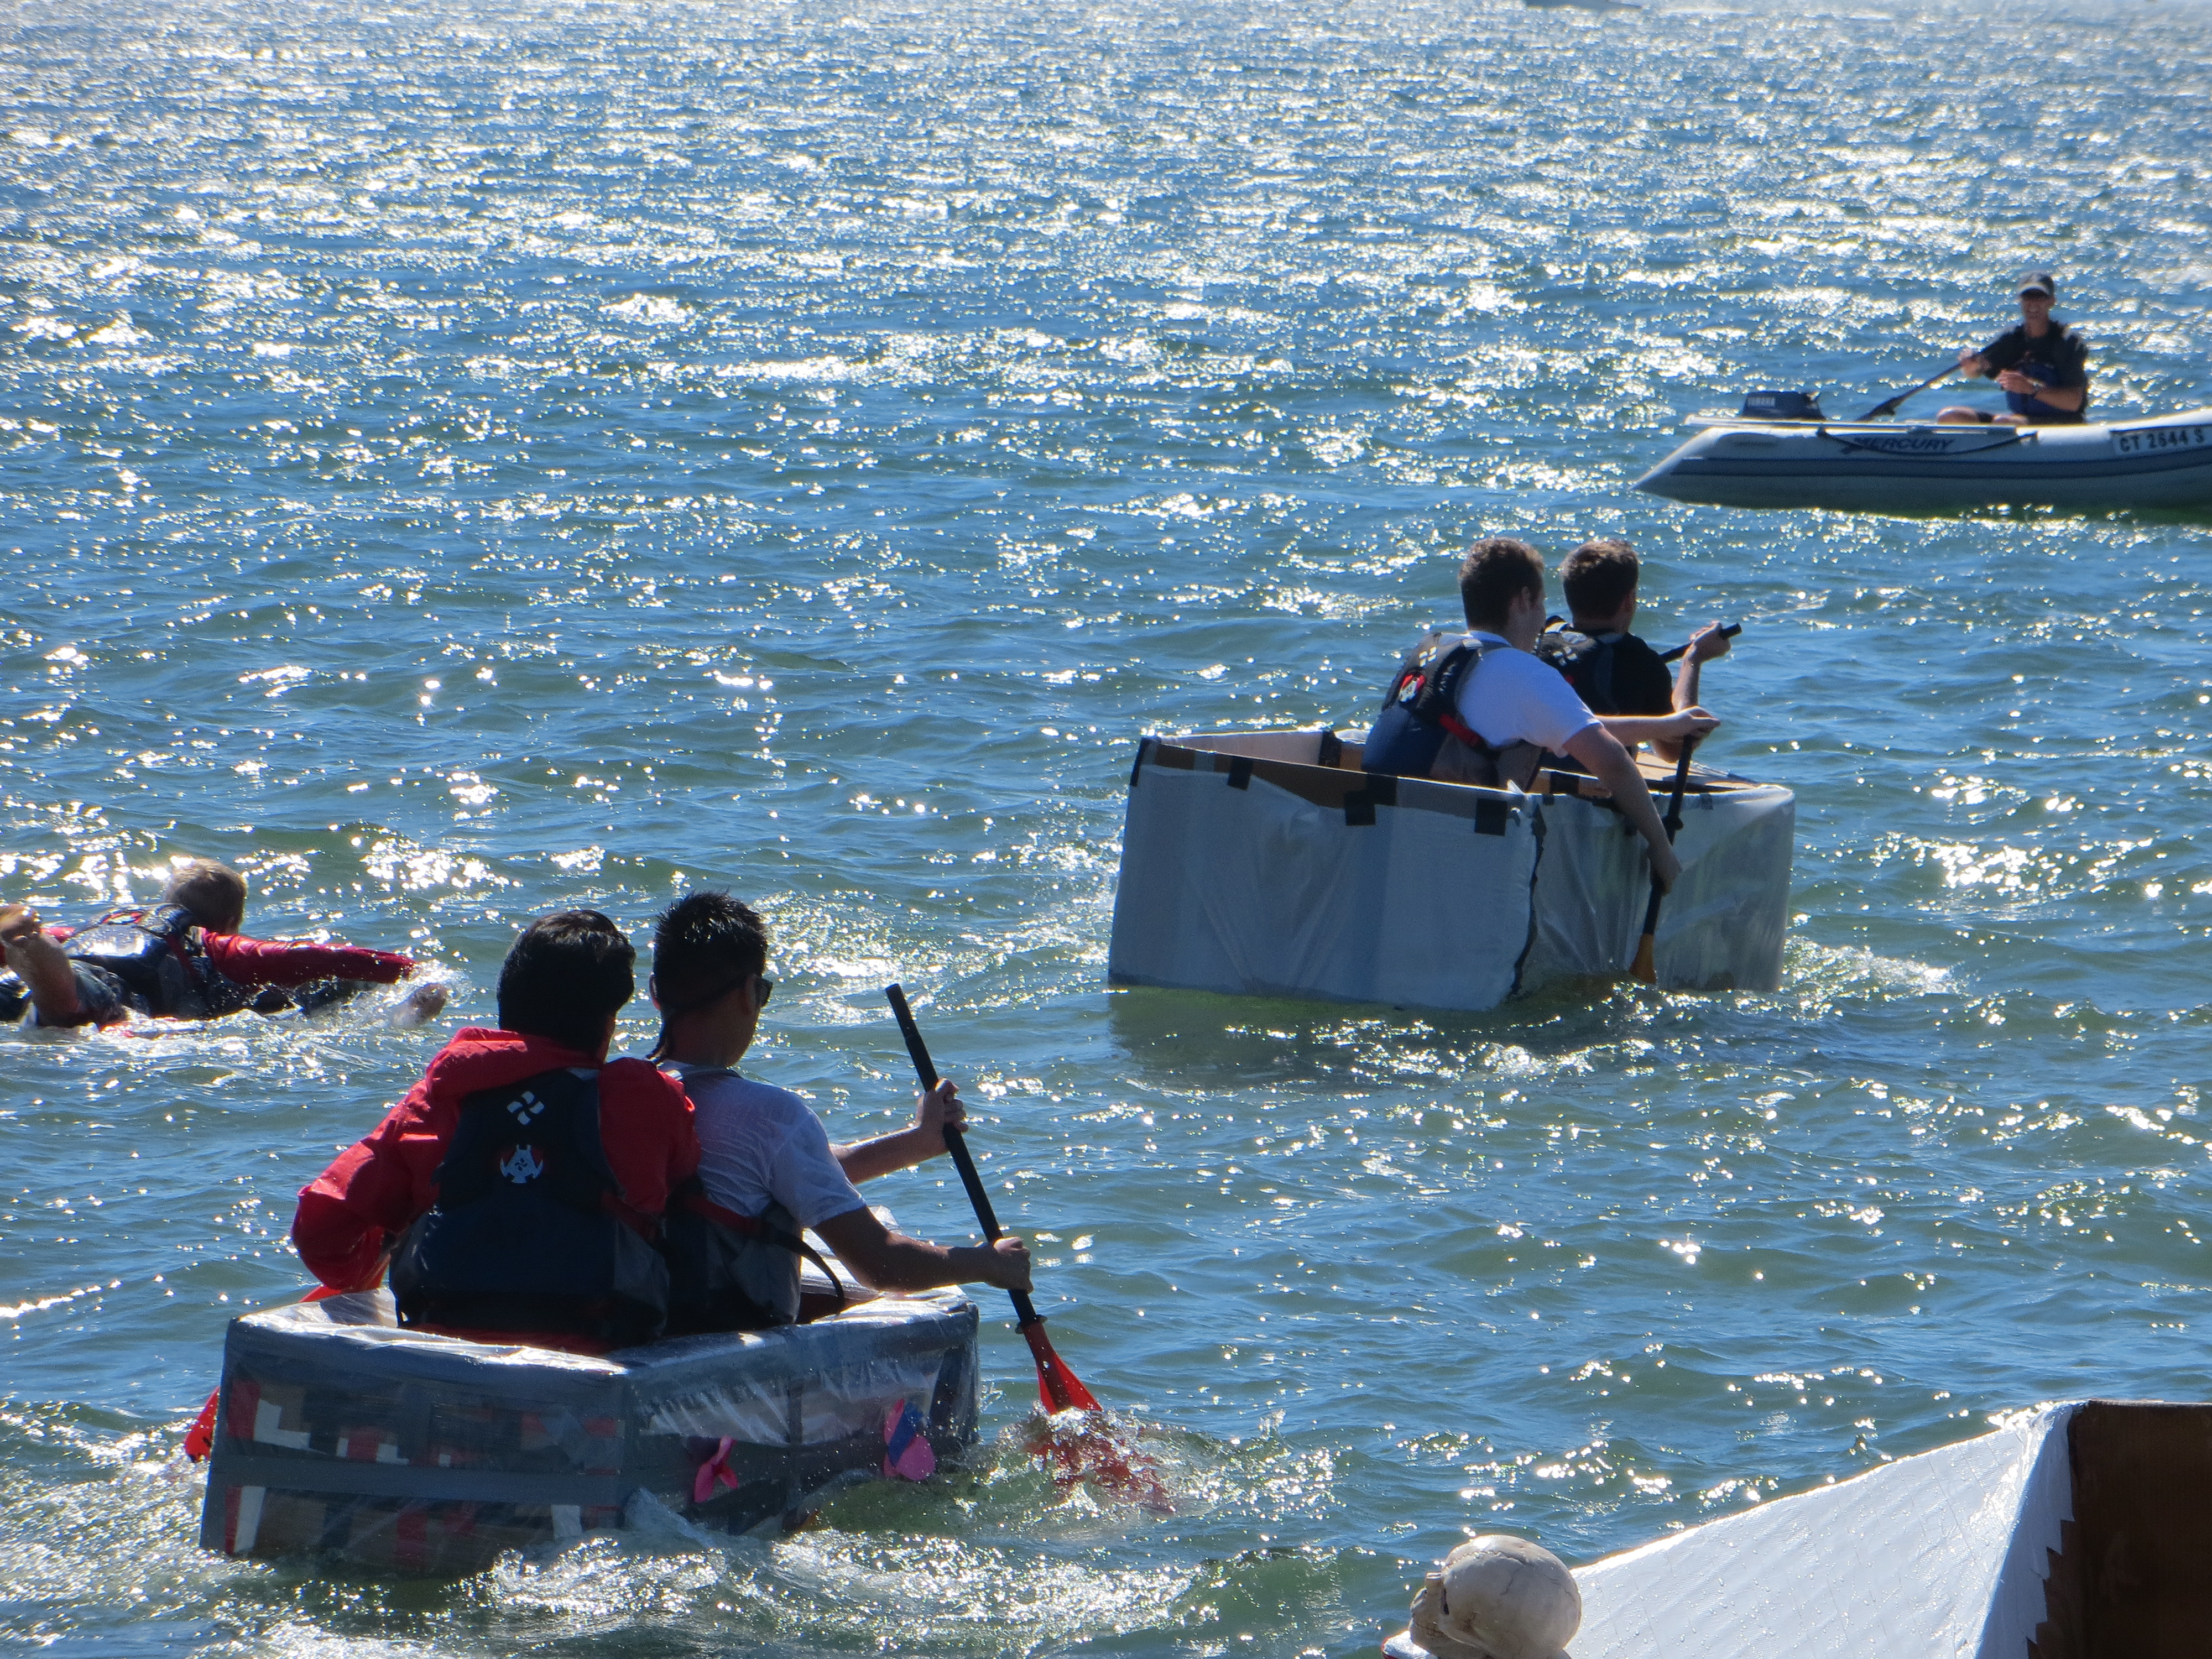 Action scene from the Cardboard Boat Race